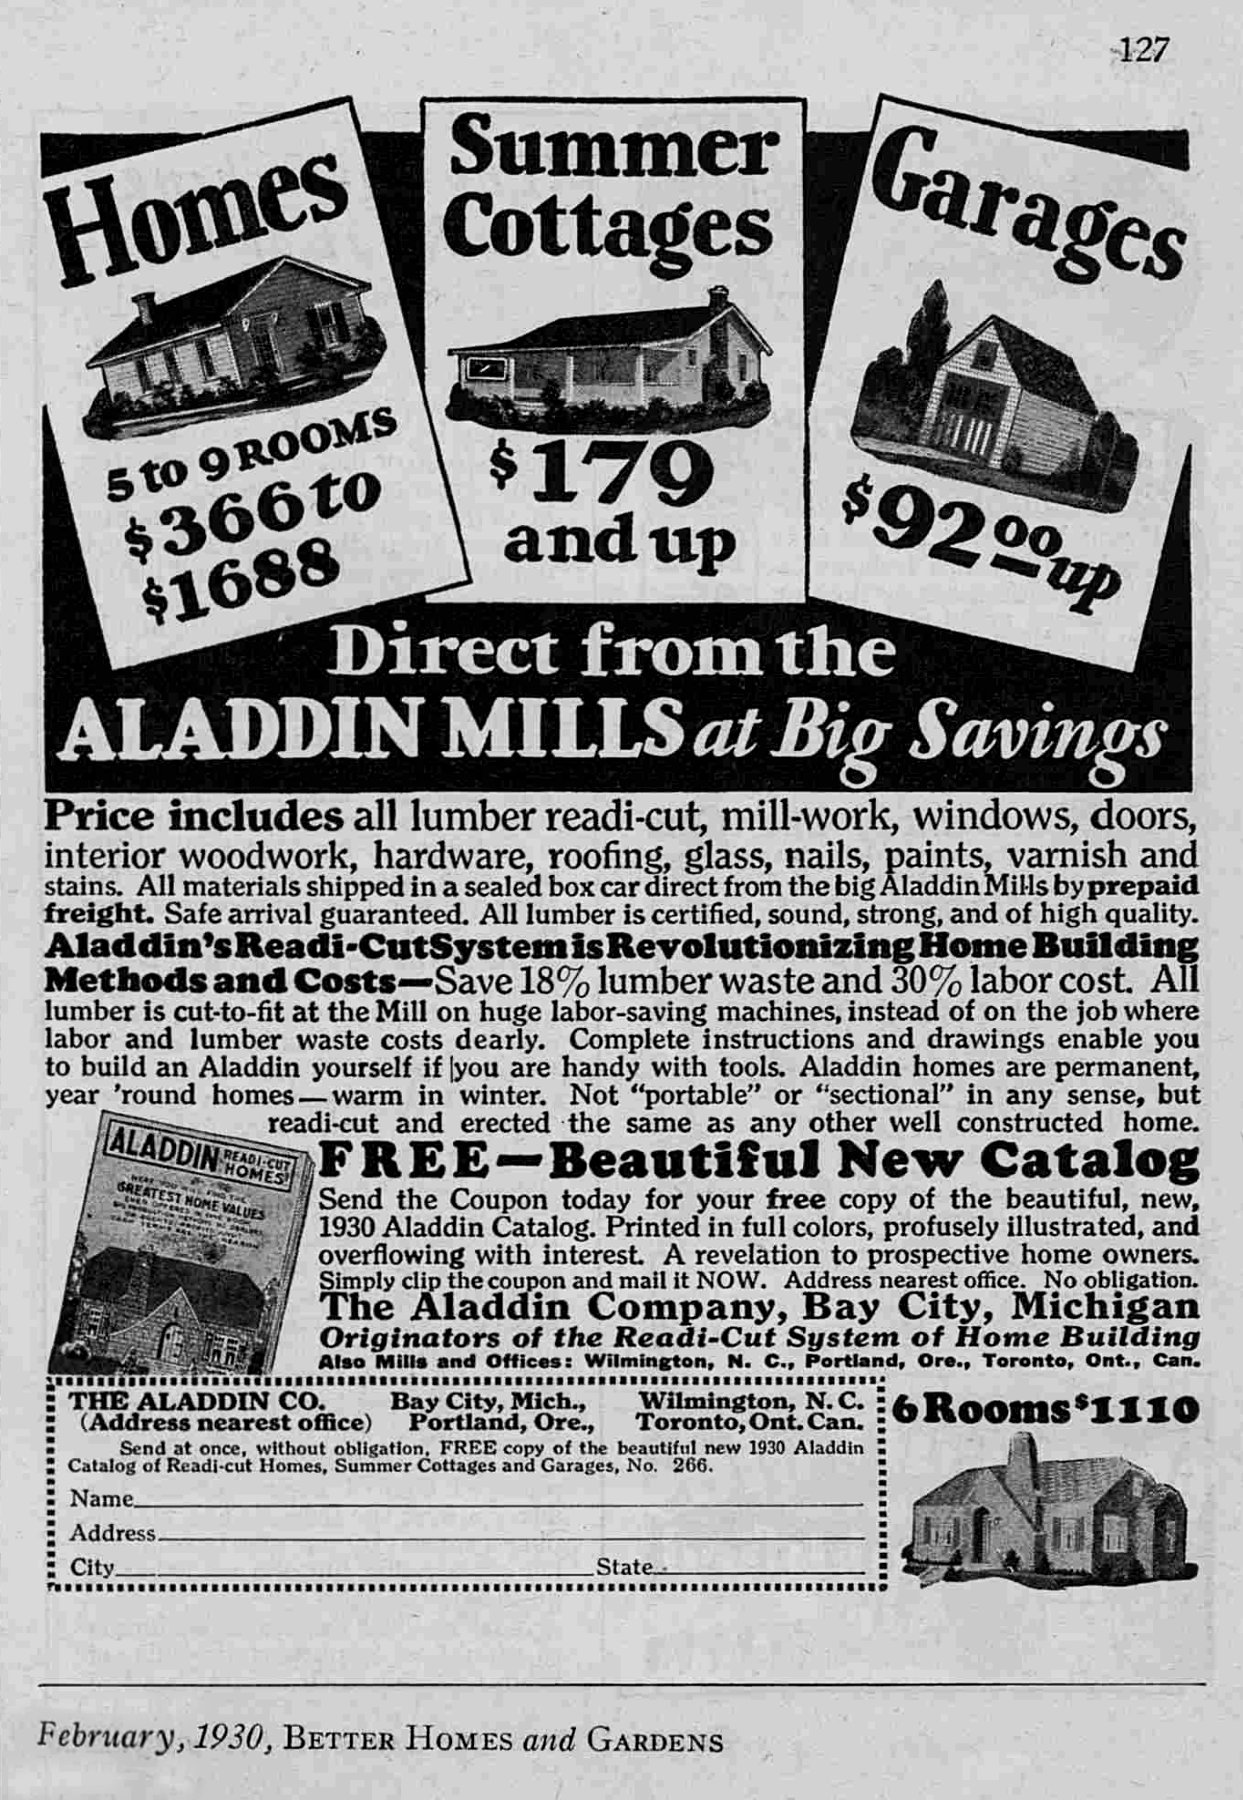 Homes Summer Cottages Garages 5 to 9ROOMS $366t $179 and up $1688 $9209up Direct from the ALADDIN MILLS at Big Savings